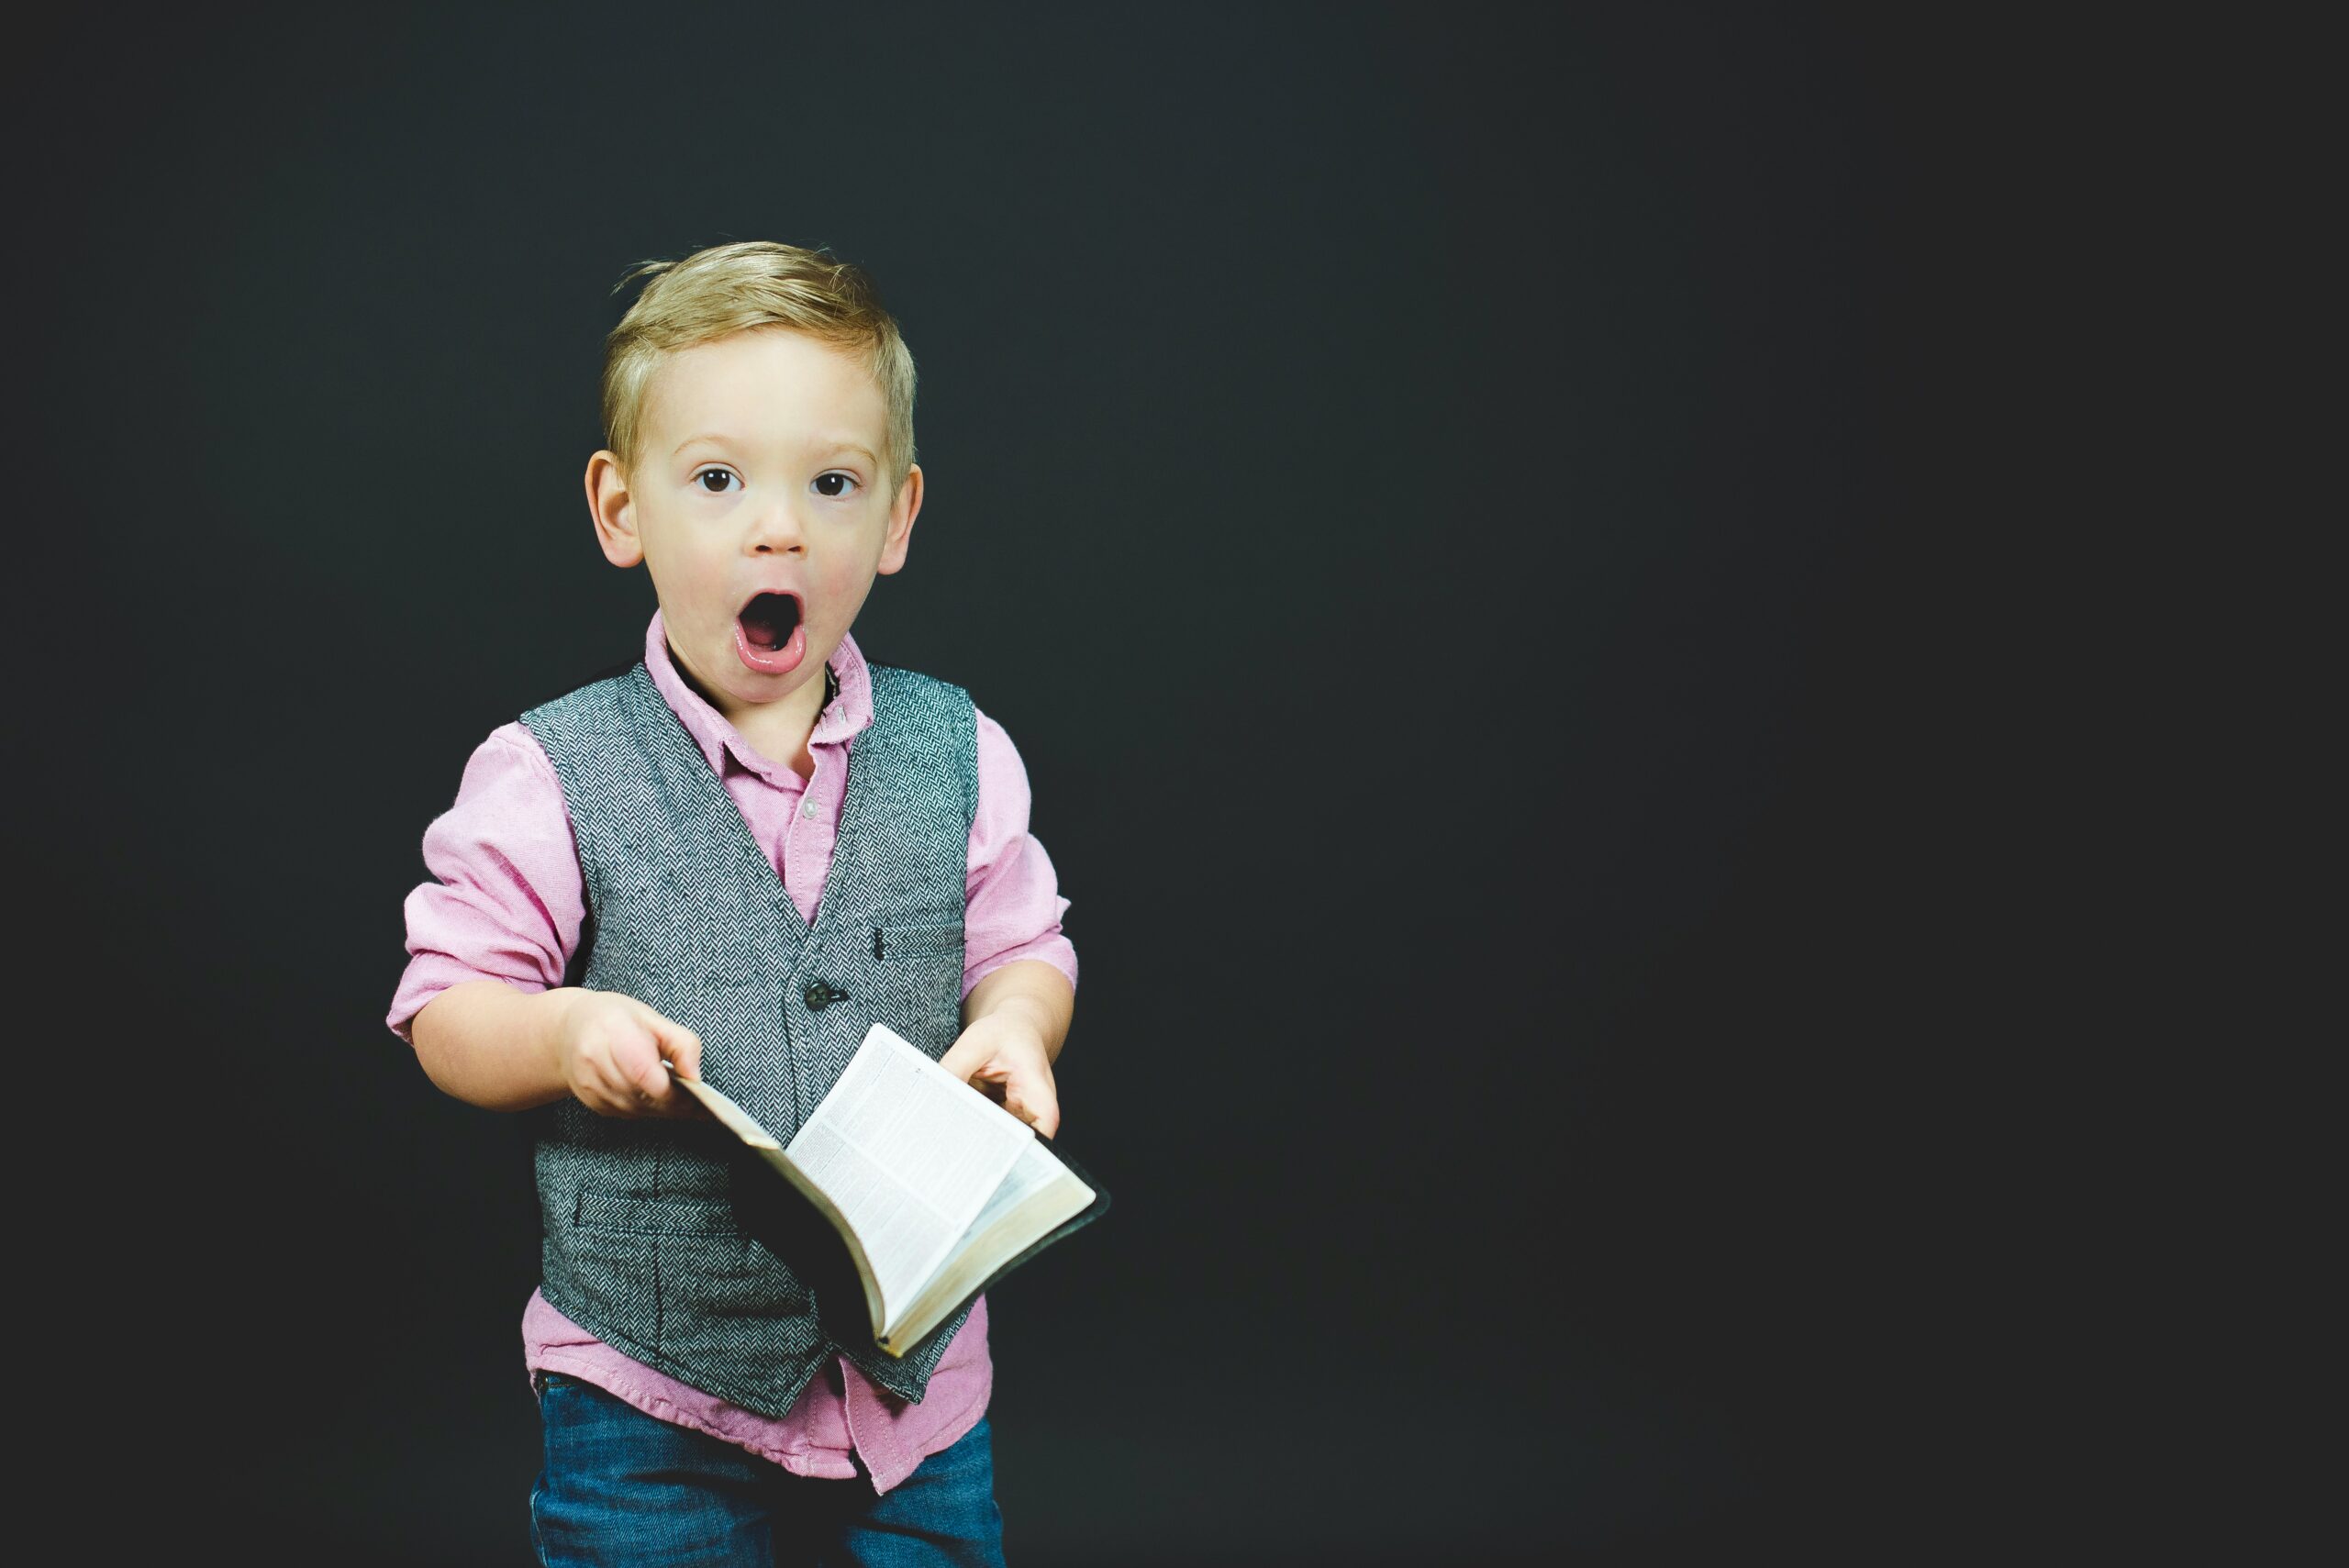 photo of a young boy all dressed up and surprised by something in a book